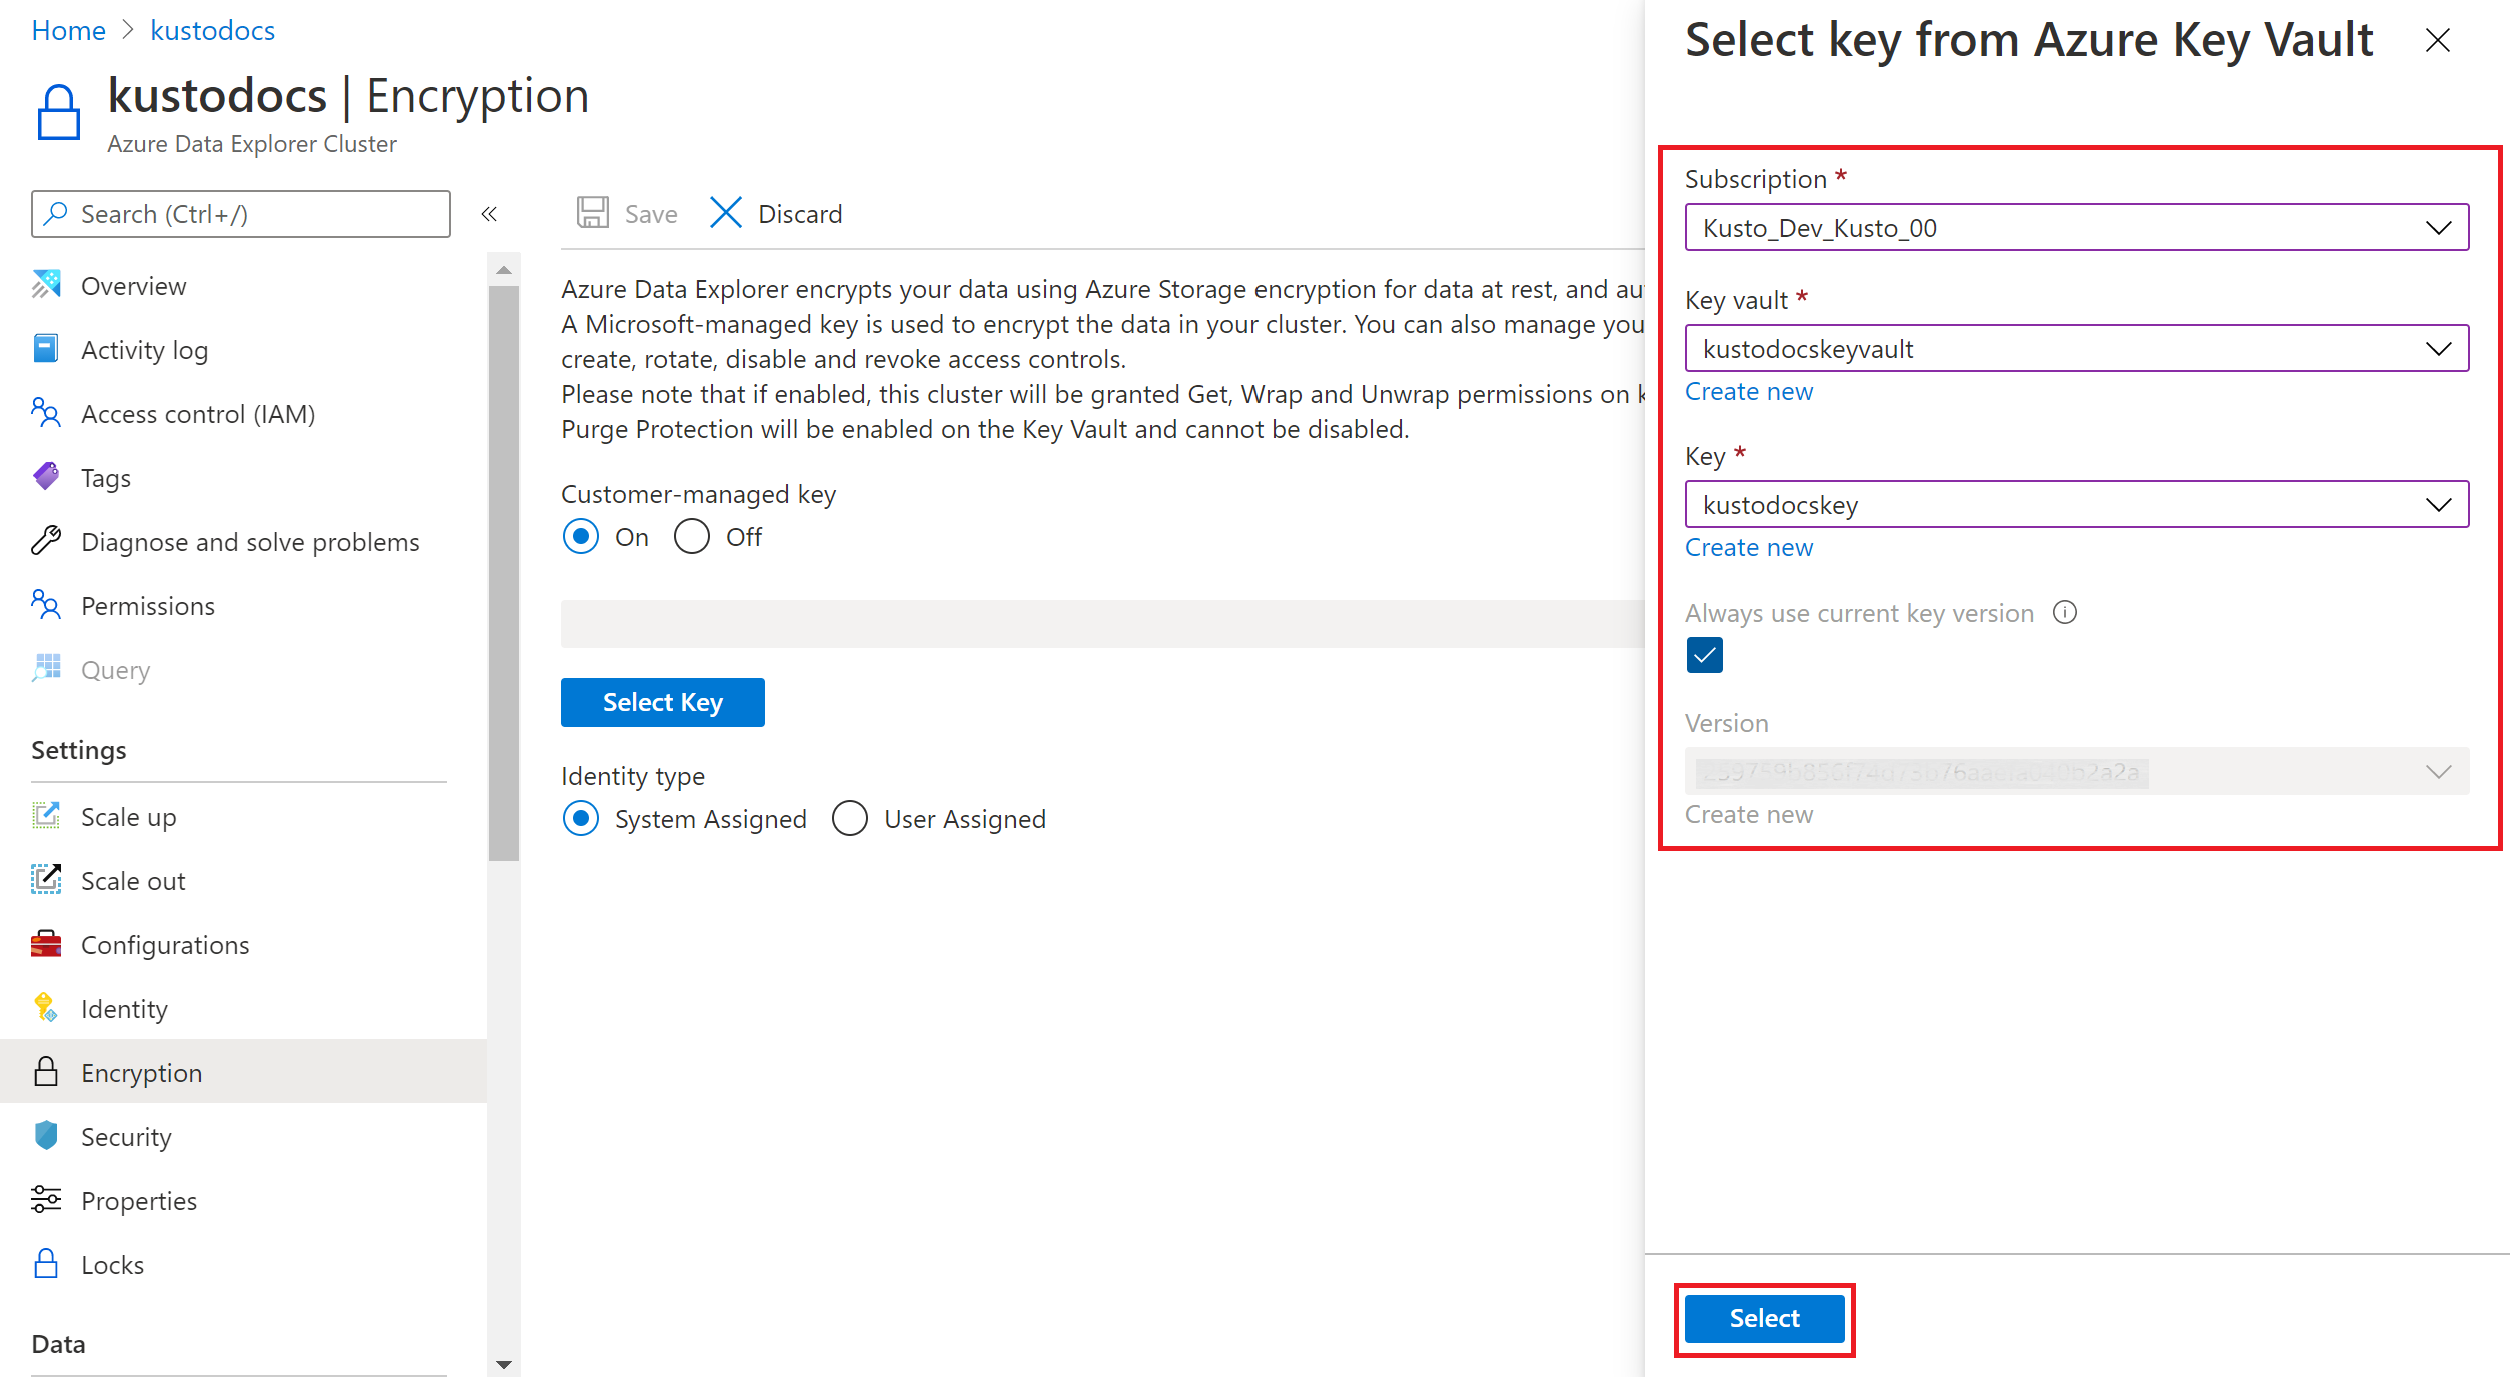 Screenshot showing the Select key from Azure Key Vault.